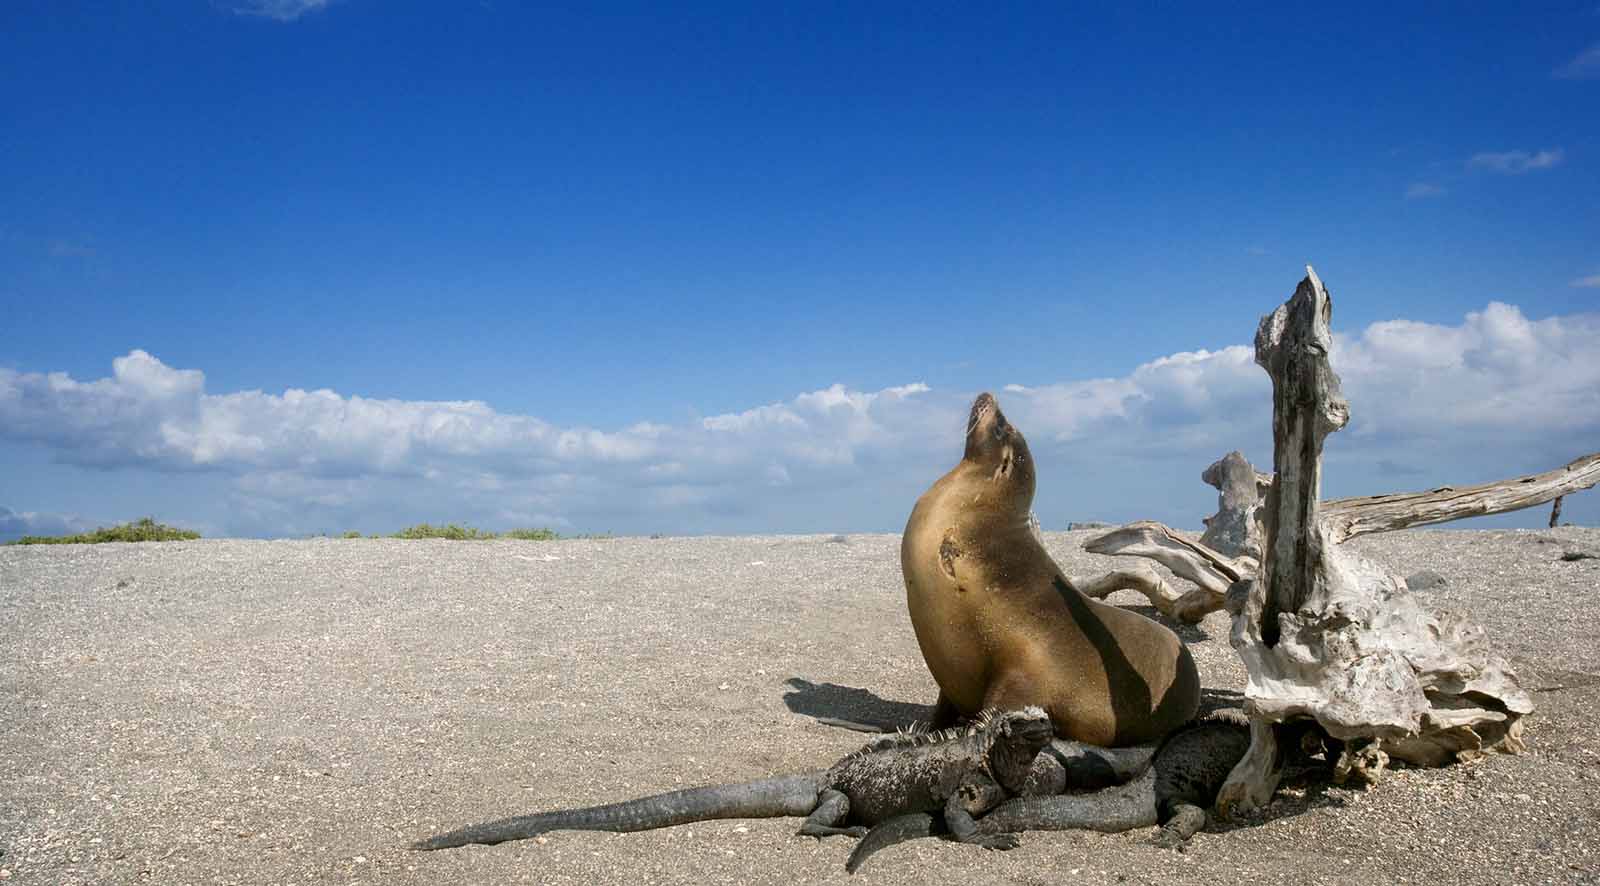 Warm Season - Galapagos Sealion | When is the best time to visit Galapagos